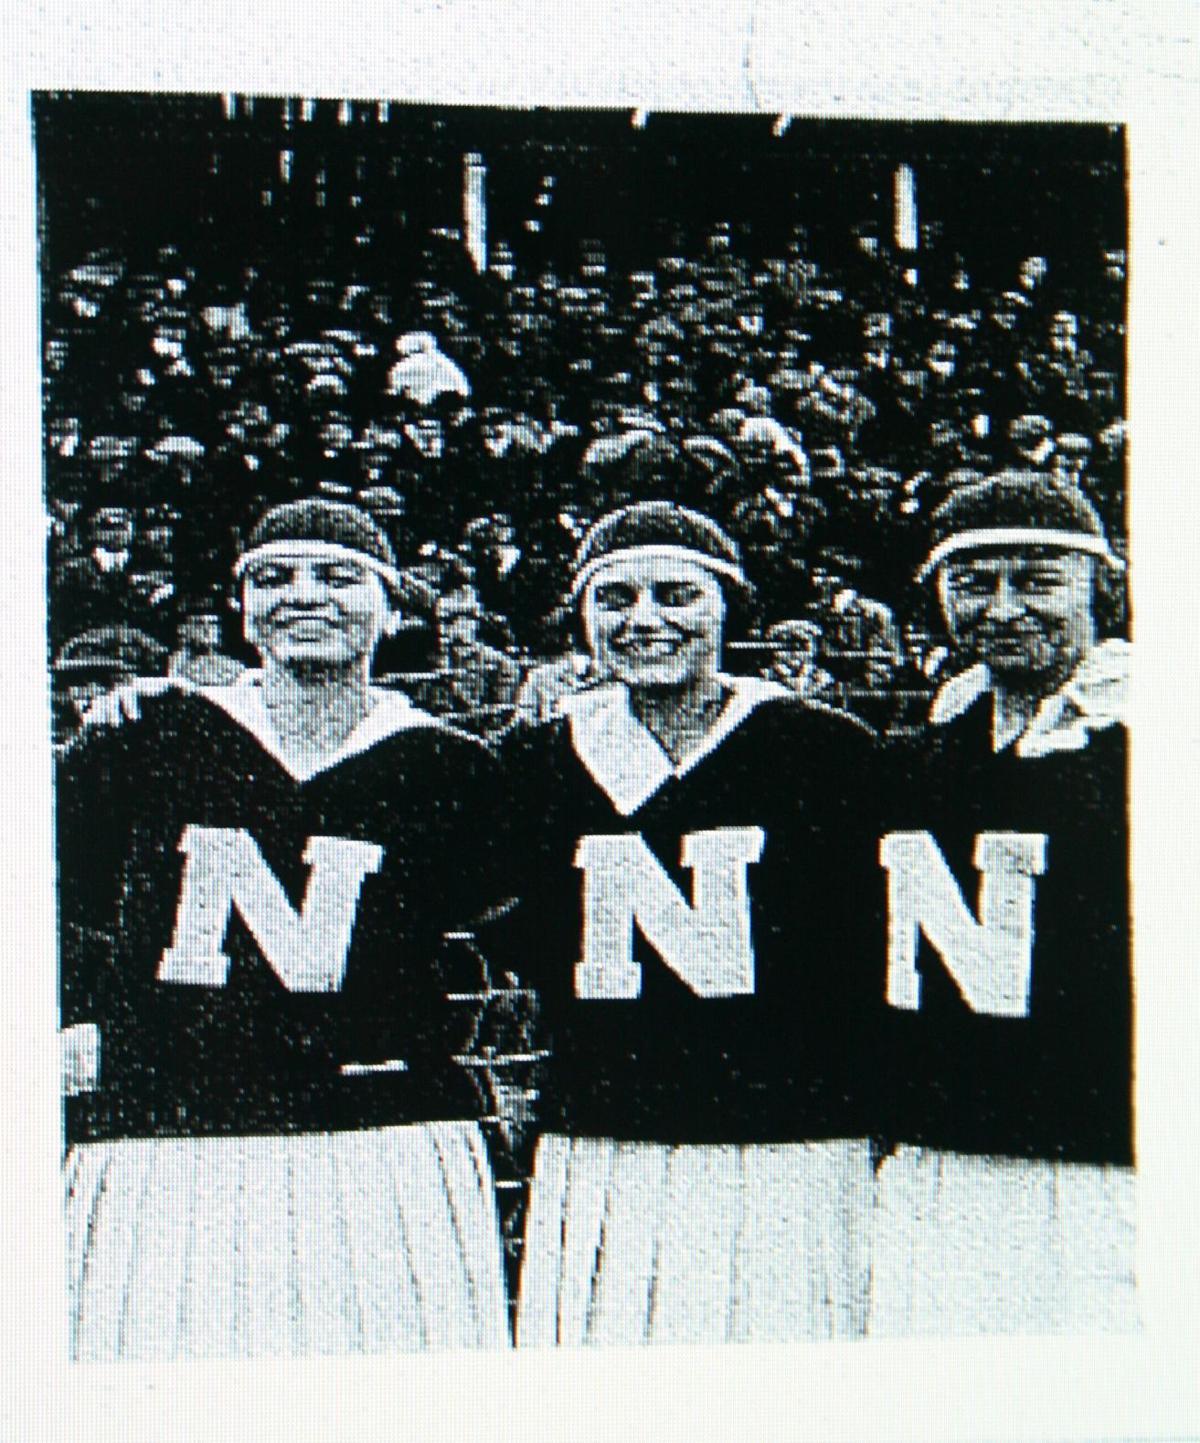 Cheering the Huskers in 1917